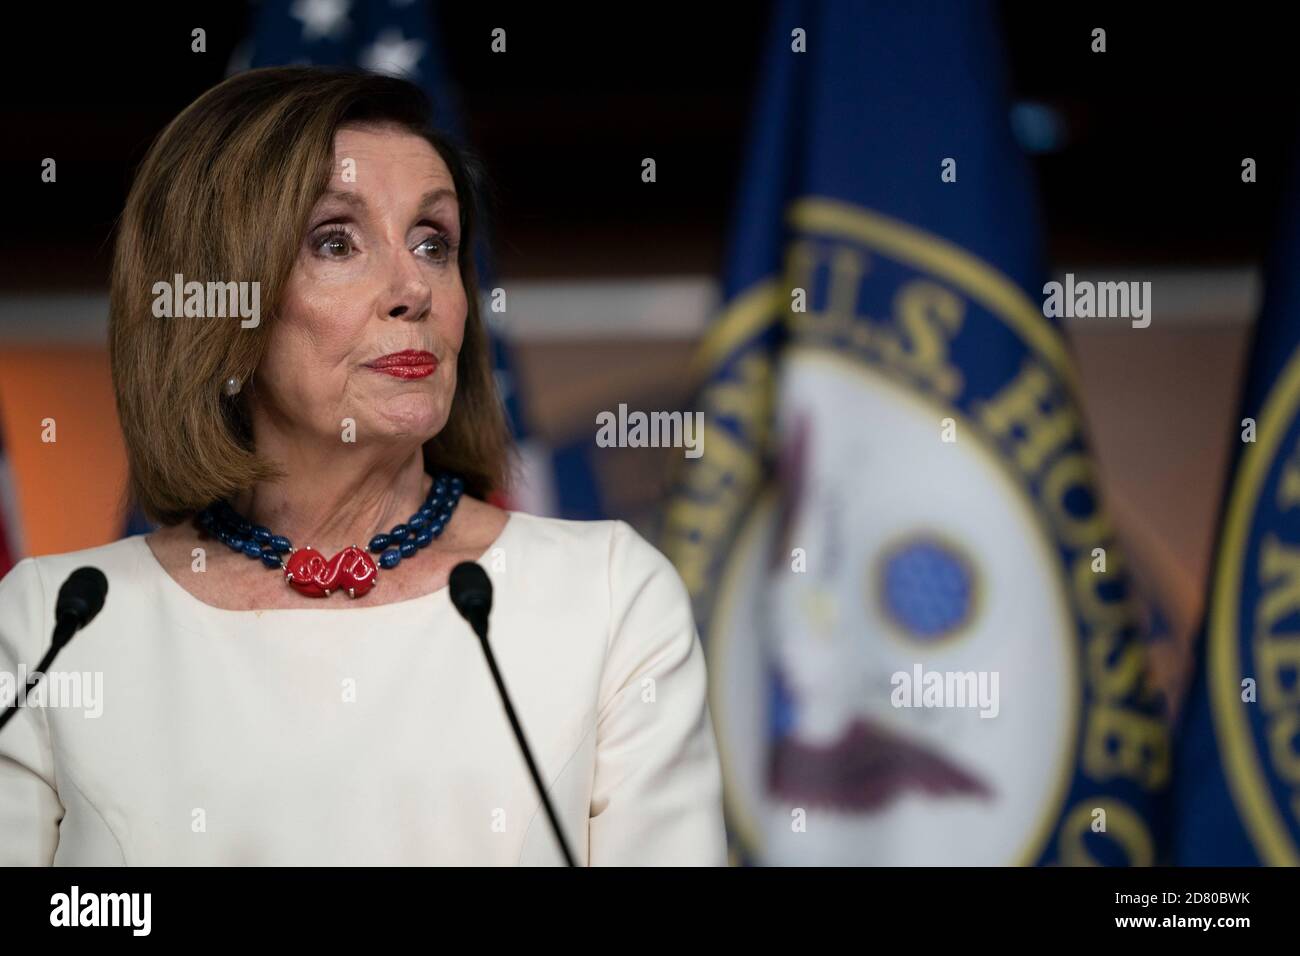 U.S. House Speaker Nancy Pelosi, a Democrat from California, speaks to members of the media during her weekly news conference in Washington, D.C., U.S., on Thursday, Sept. 26, 2019. Pelosi reiterated the reasons why House Democrats have begun the impeachment process against President Donald Trump. Credit: Alex Edelman/The Photo Access Stock Photo